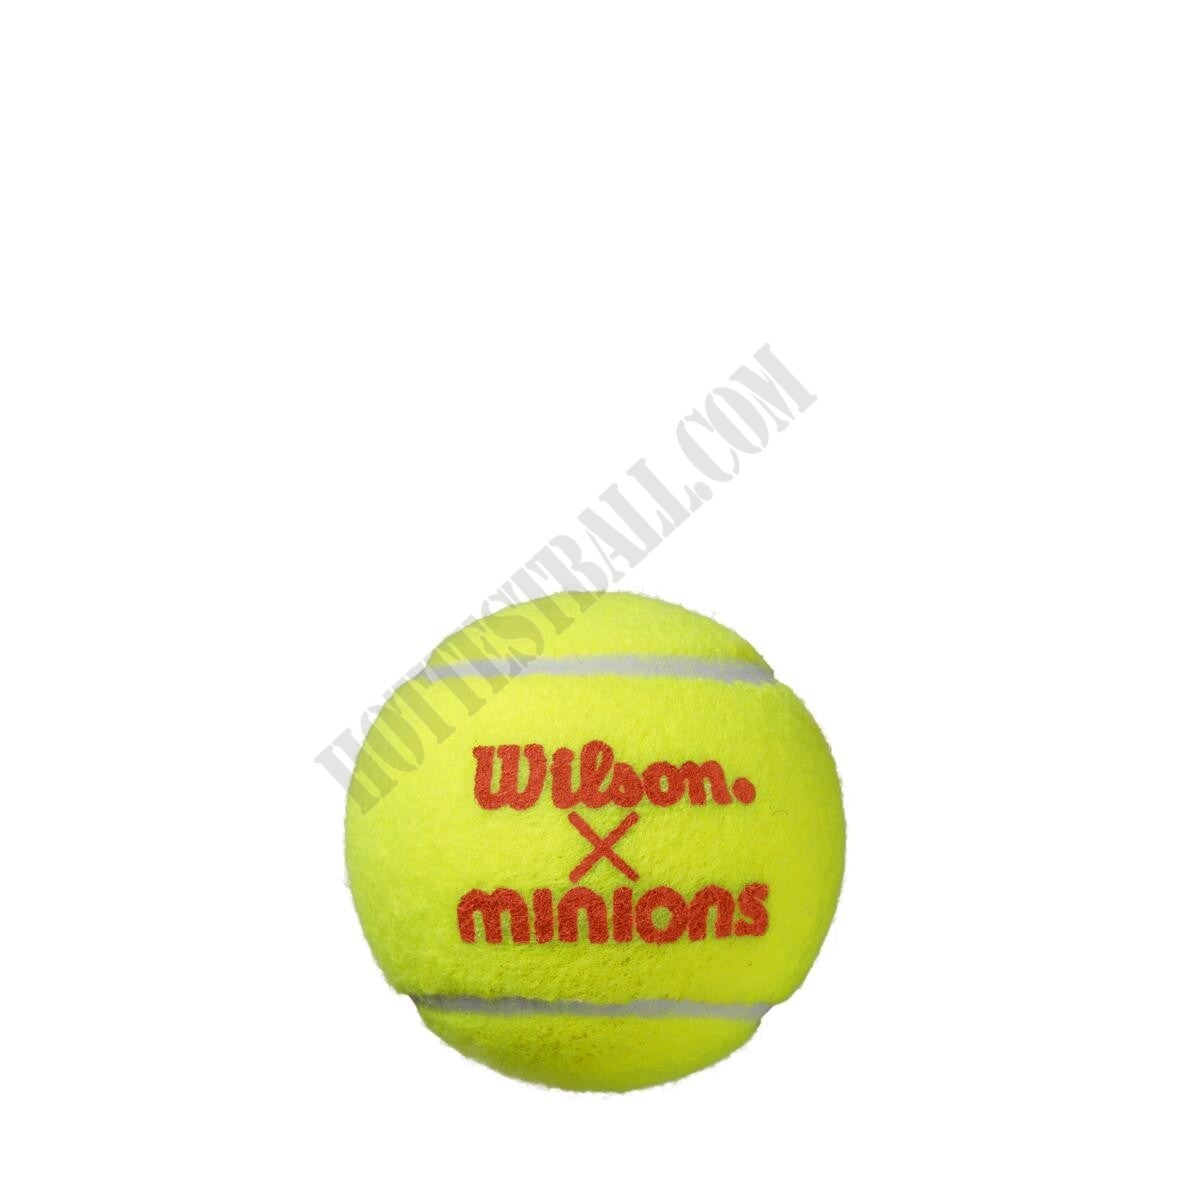 Minions Stage 2 Tennis BSleeve - Wilson Discount Store - -1